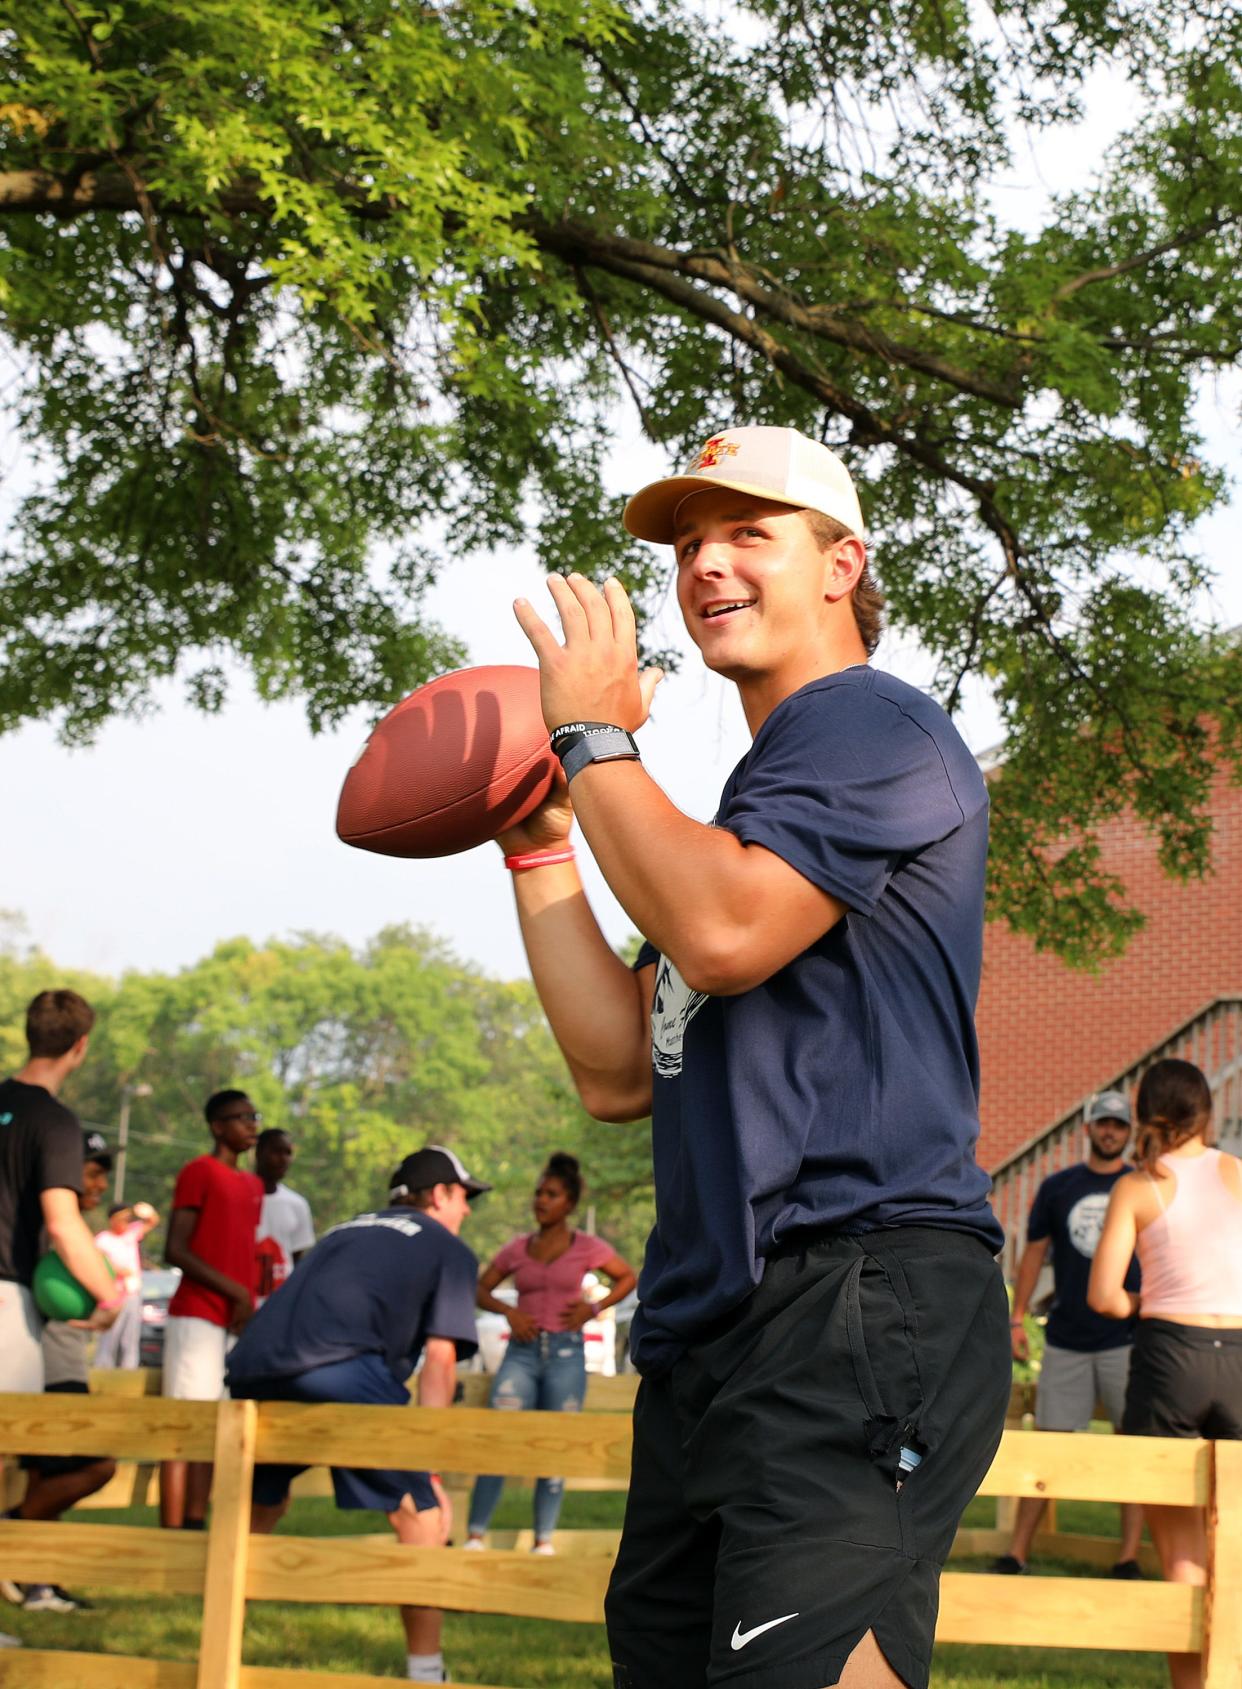 Iowa State quarterback Brock Purdy throws passes to kids during the Empowered Youth event at The Well Covenant Church in Des Moines on July 22, 2021.